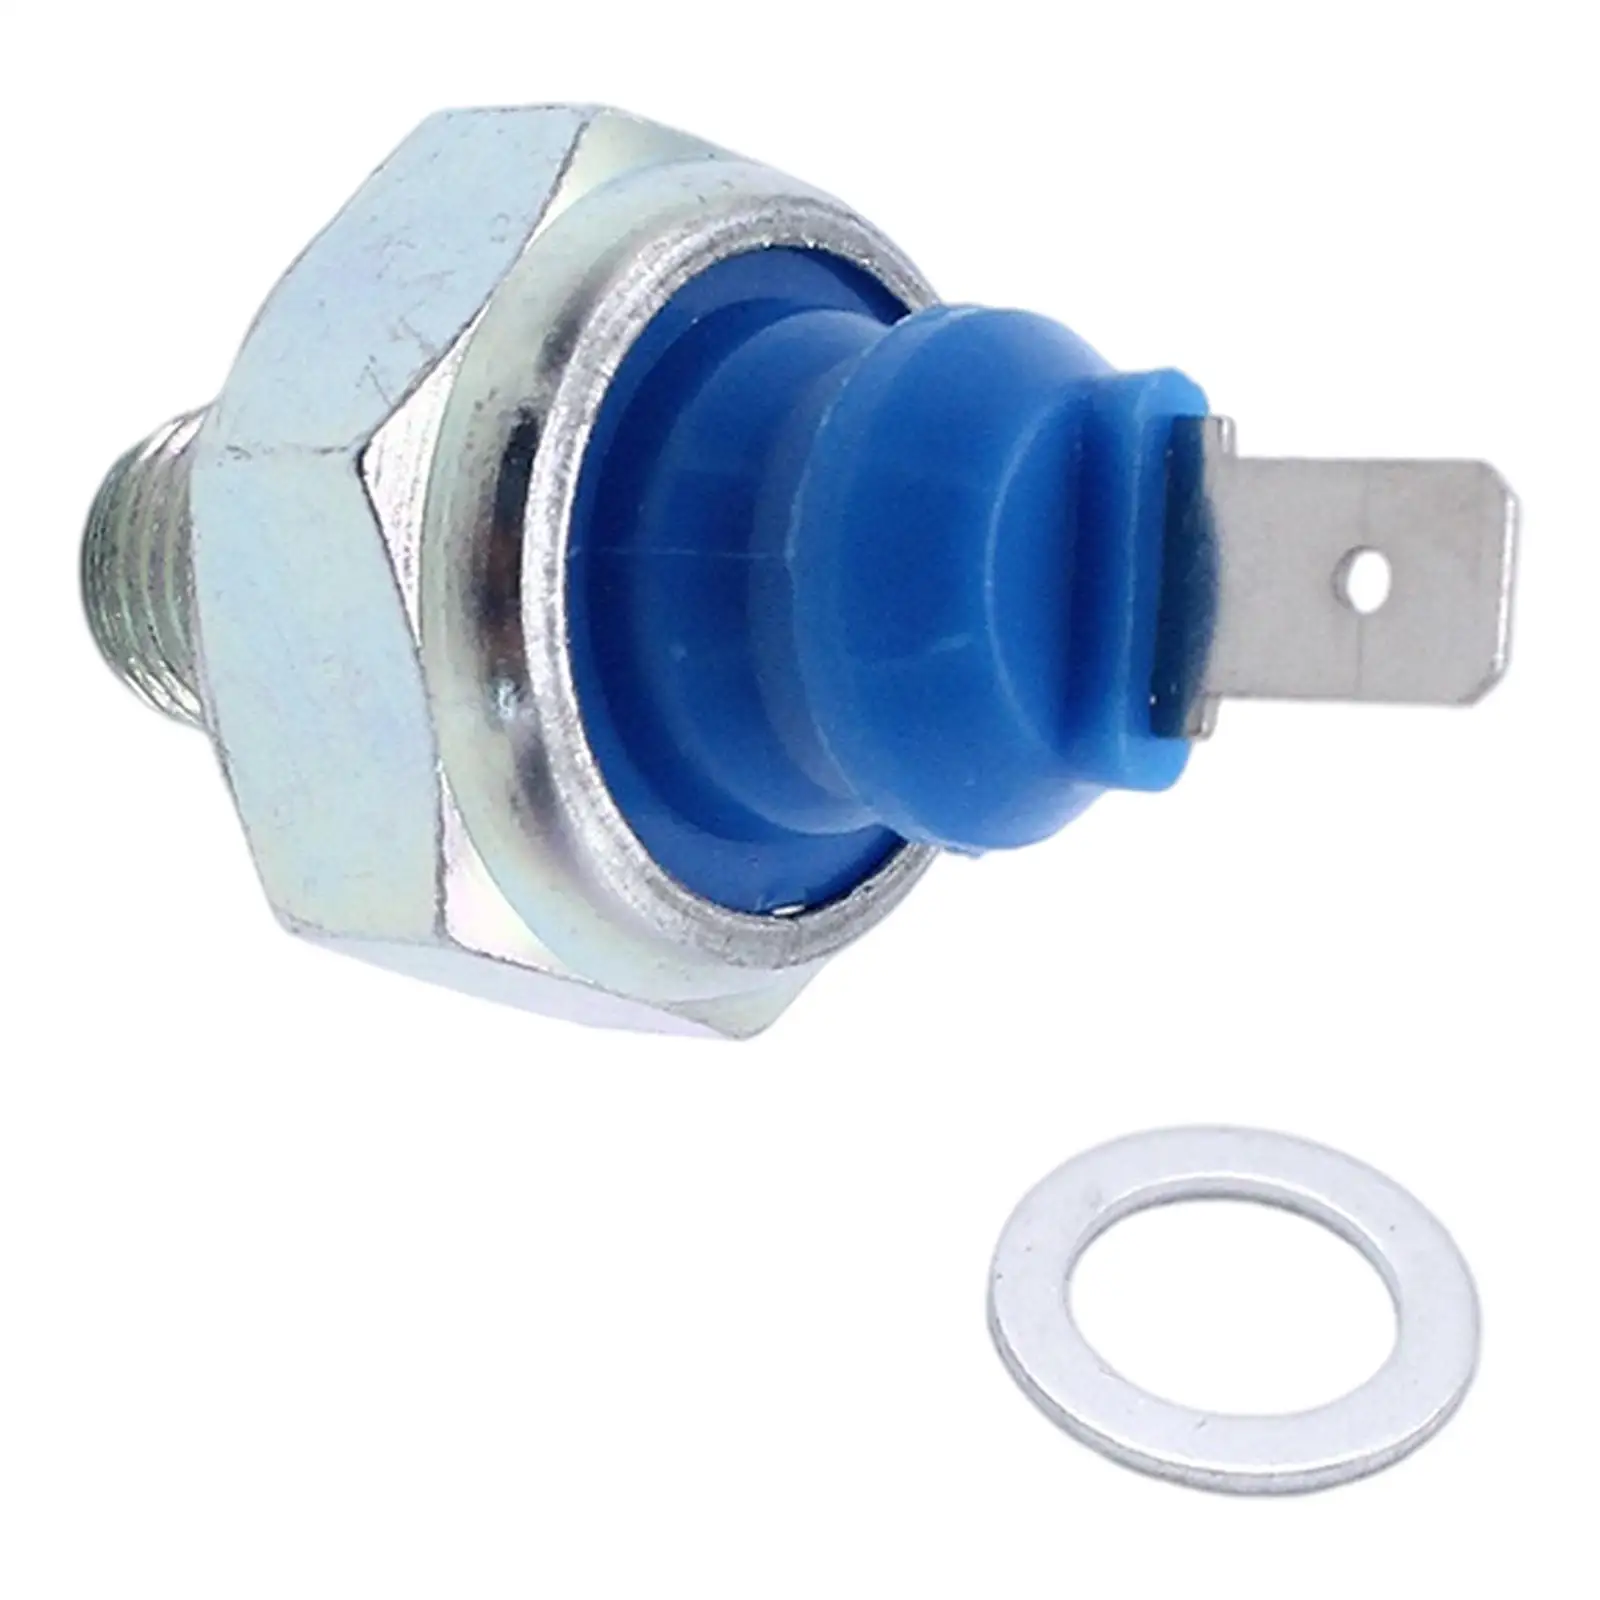 Vehicle Oil Pressure Sensor 056919081E Switch Fit for Audi 80 90 100 A4 Sender Units Sealing Rings for Seat 056919081A